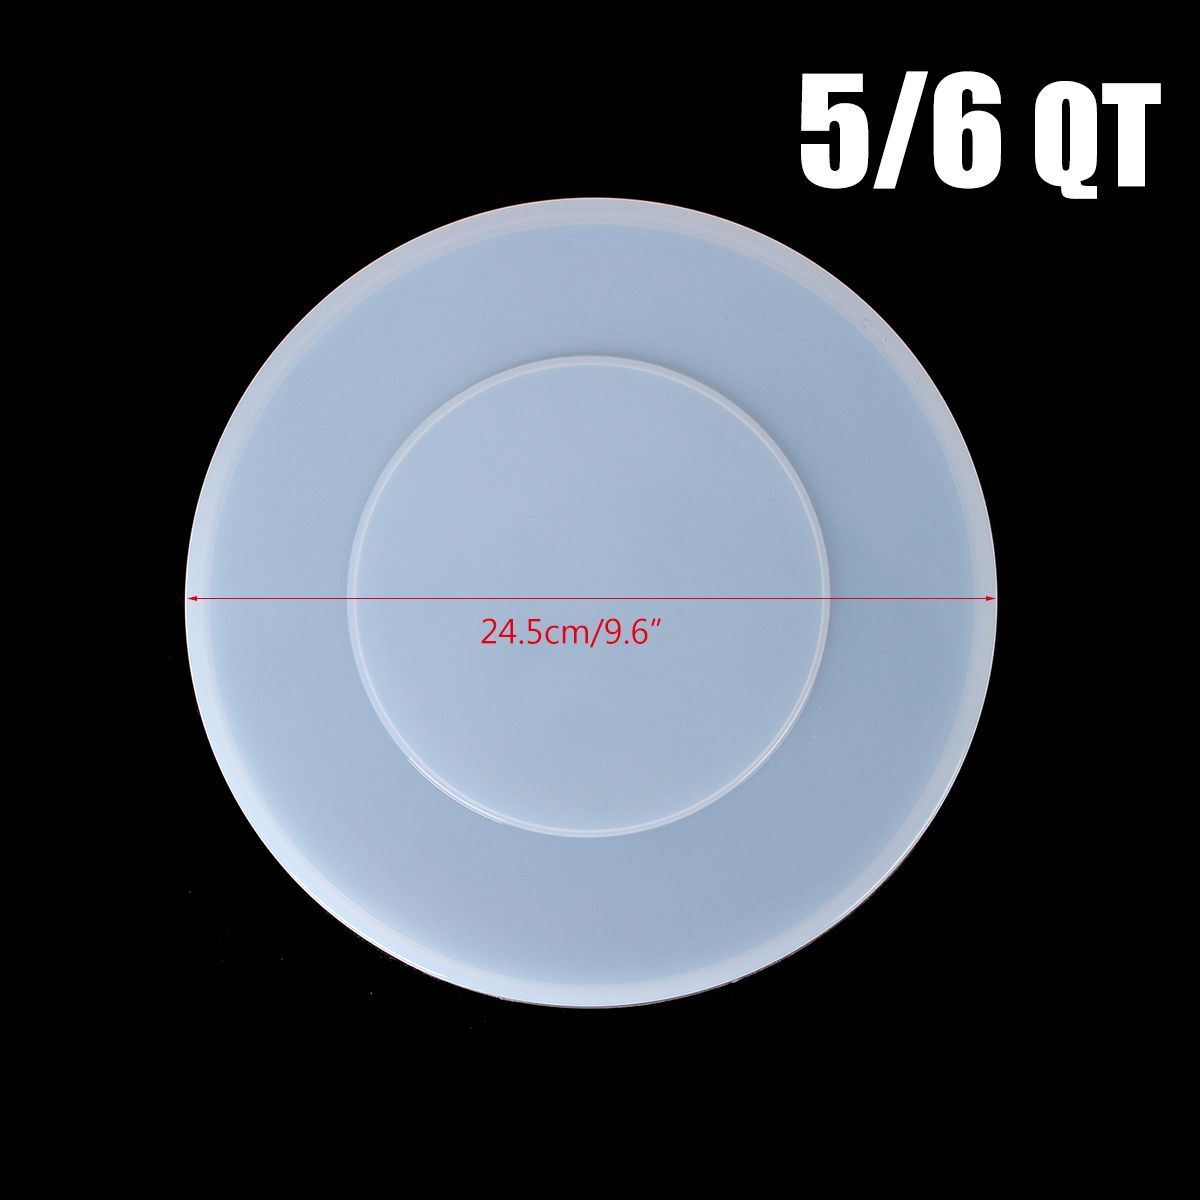 3568QT-Silicone-Cover-Inner-Lid-Container-Spill-resistant-Cover-for-Instant-Pots-1468205